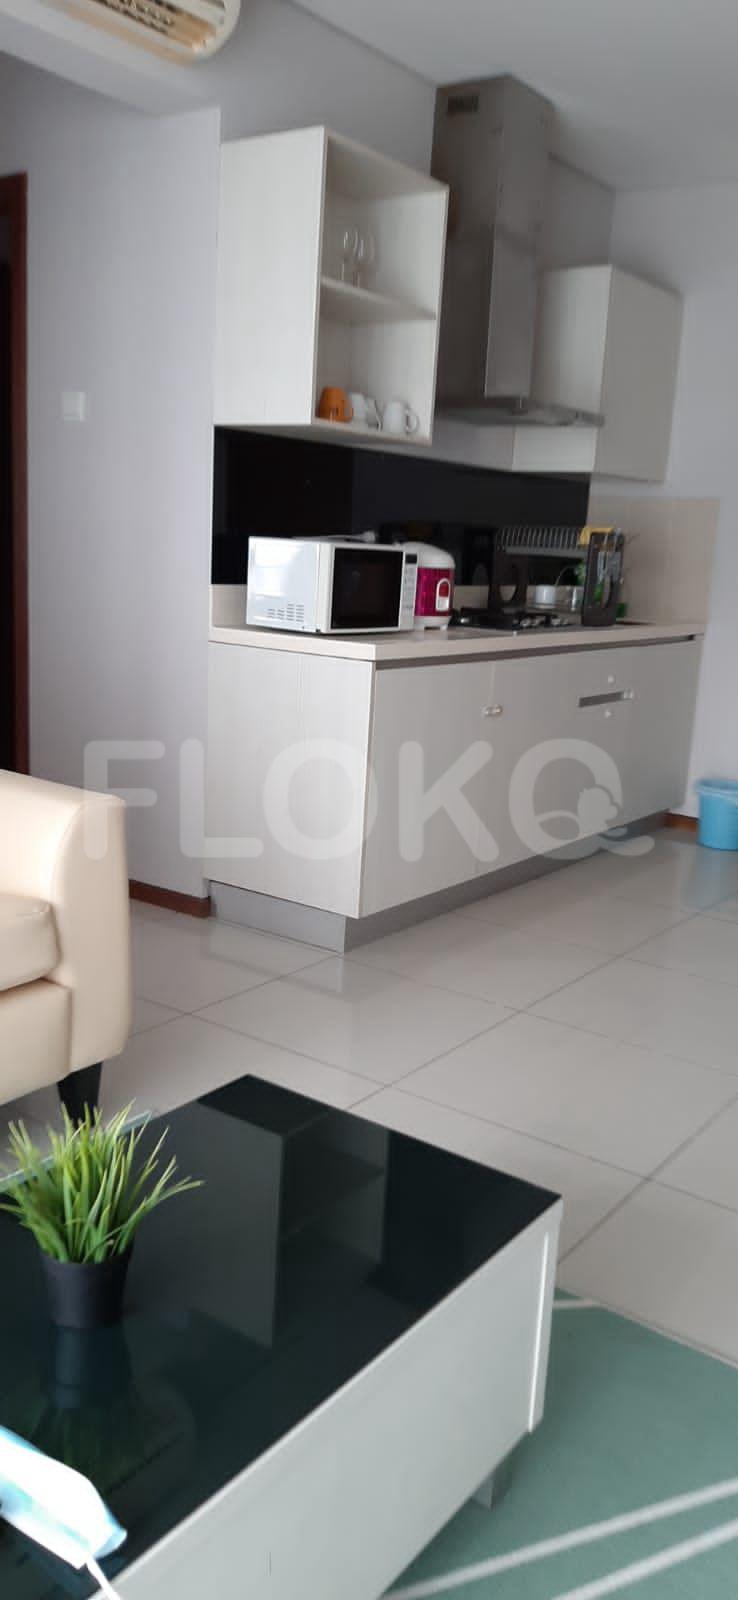 2 Bedroom on 16th Floor for Rent in Thamrin Executive Residence - fth4fc 4